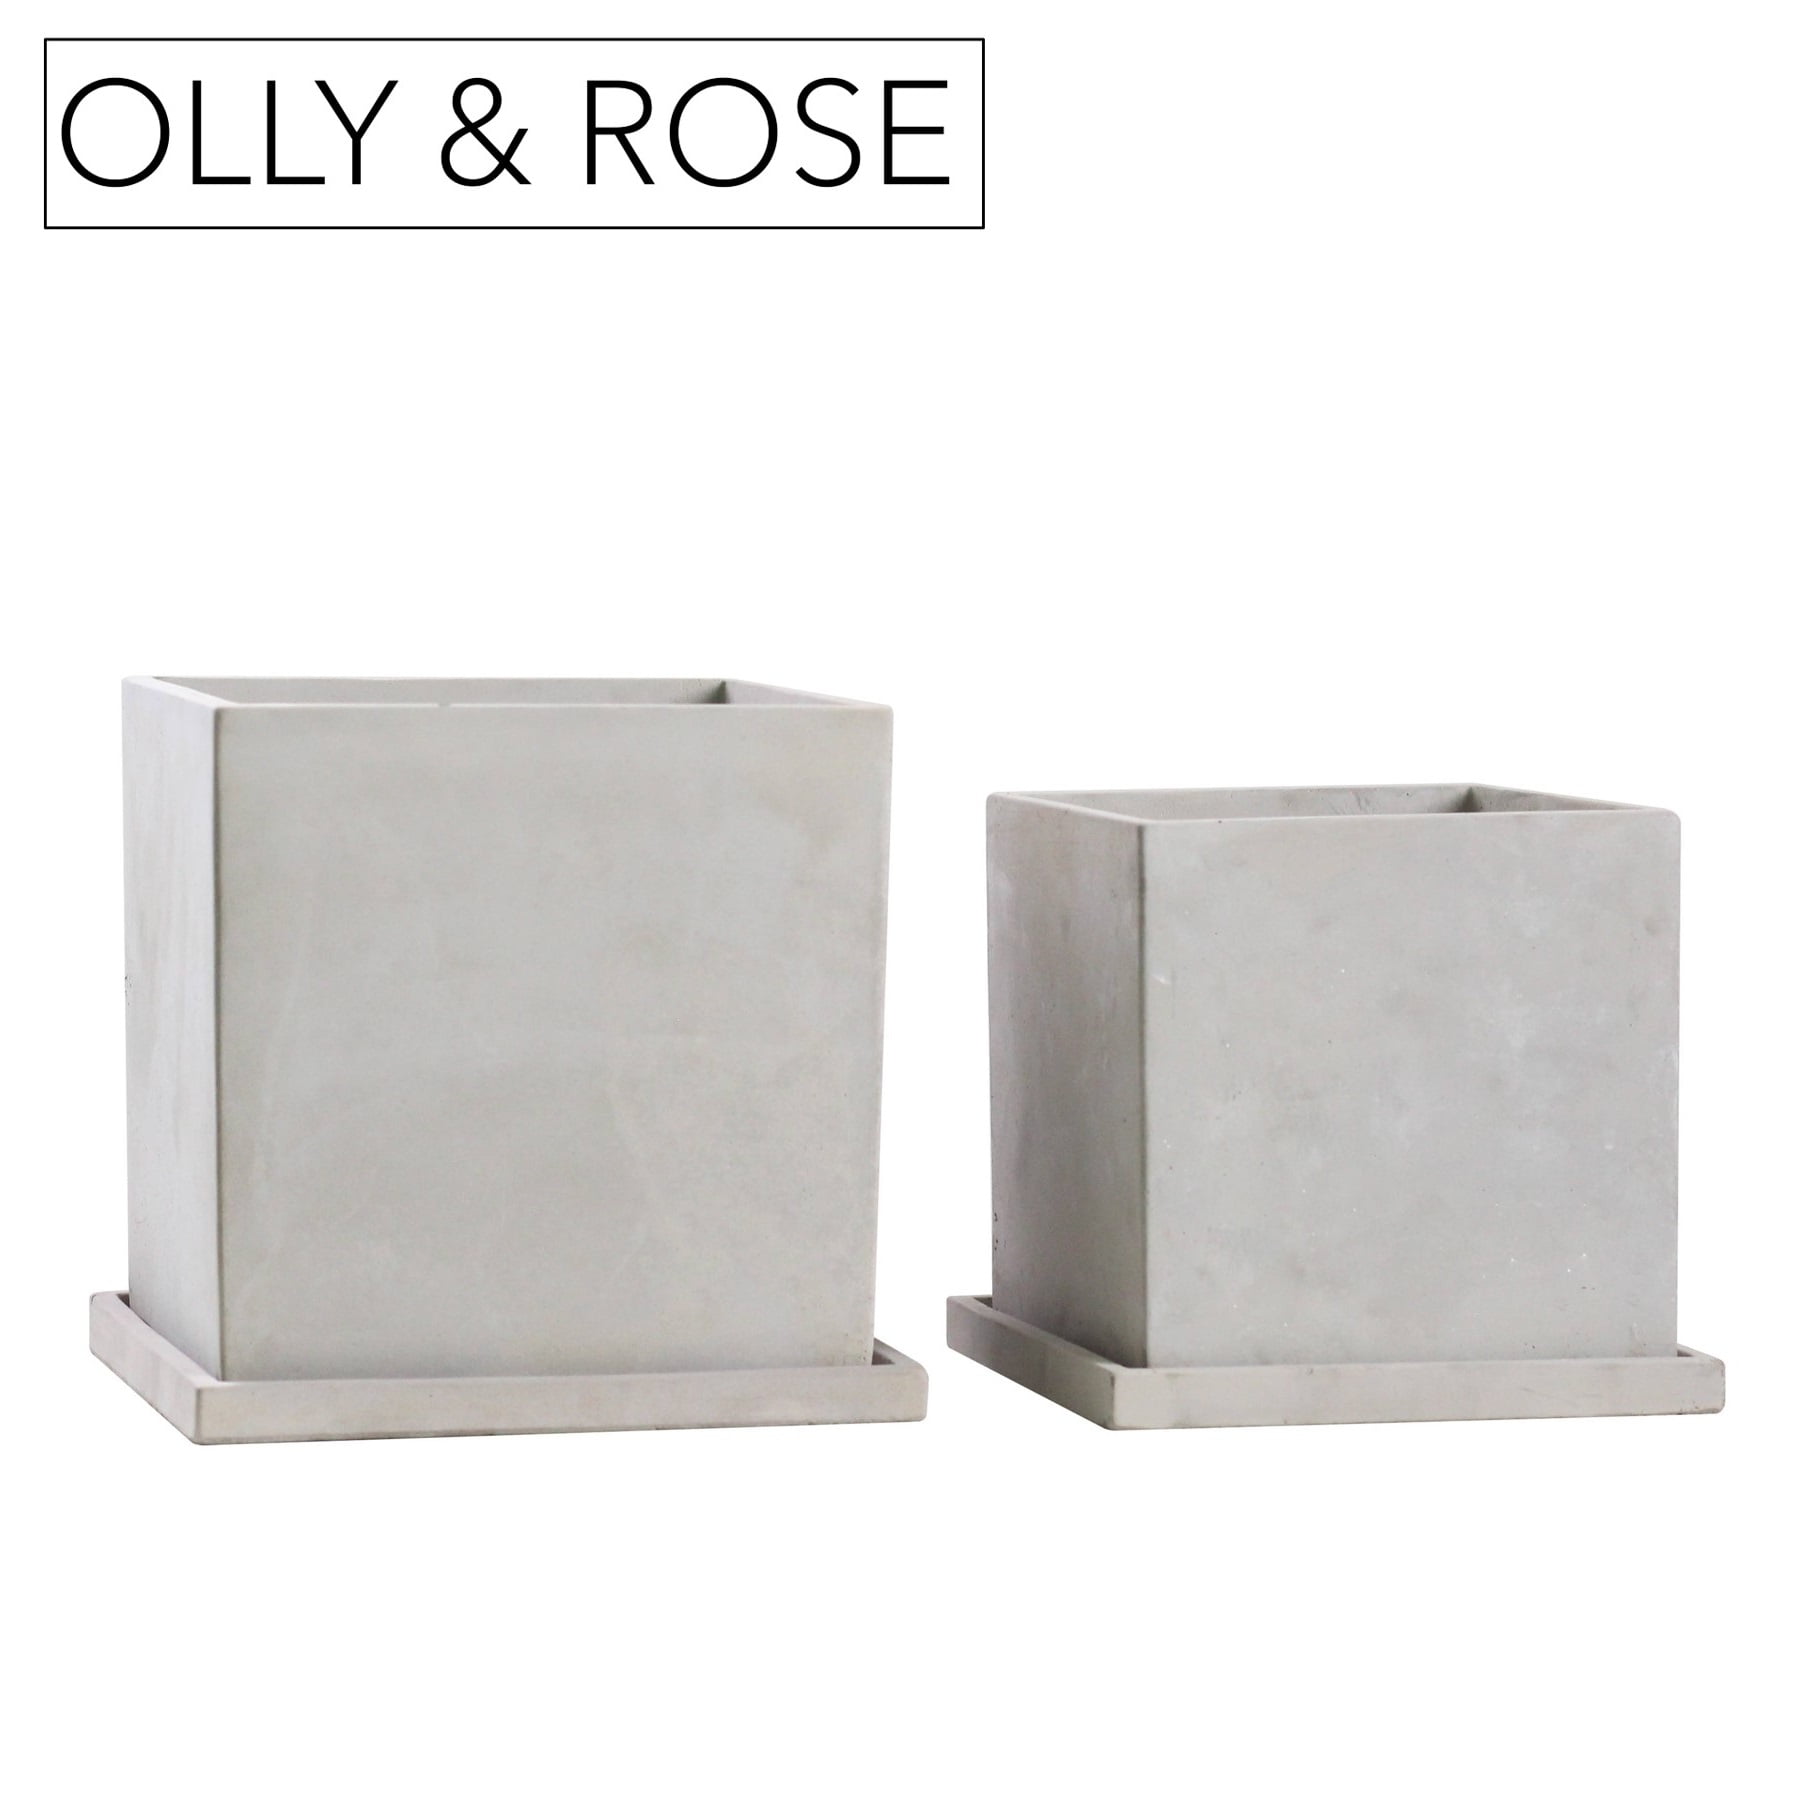 Olly & Rose Ceramic Plant Pot Large 10 inch Off White Flower Pots Indoor Outdoor Planters Gray